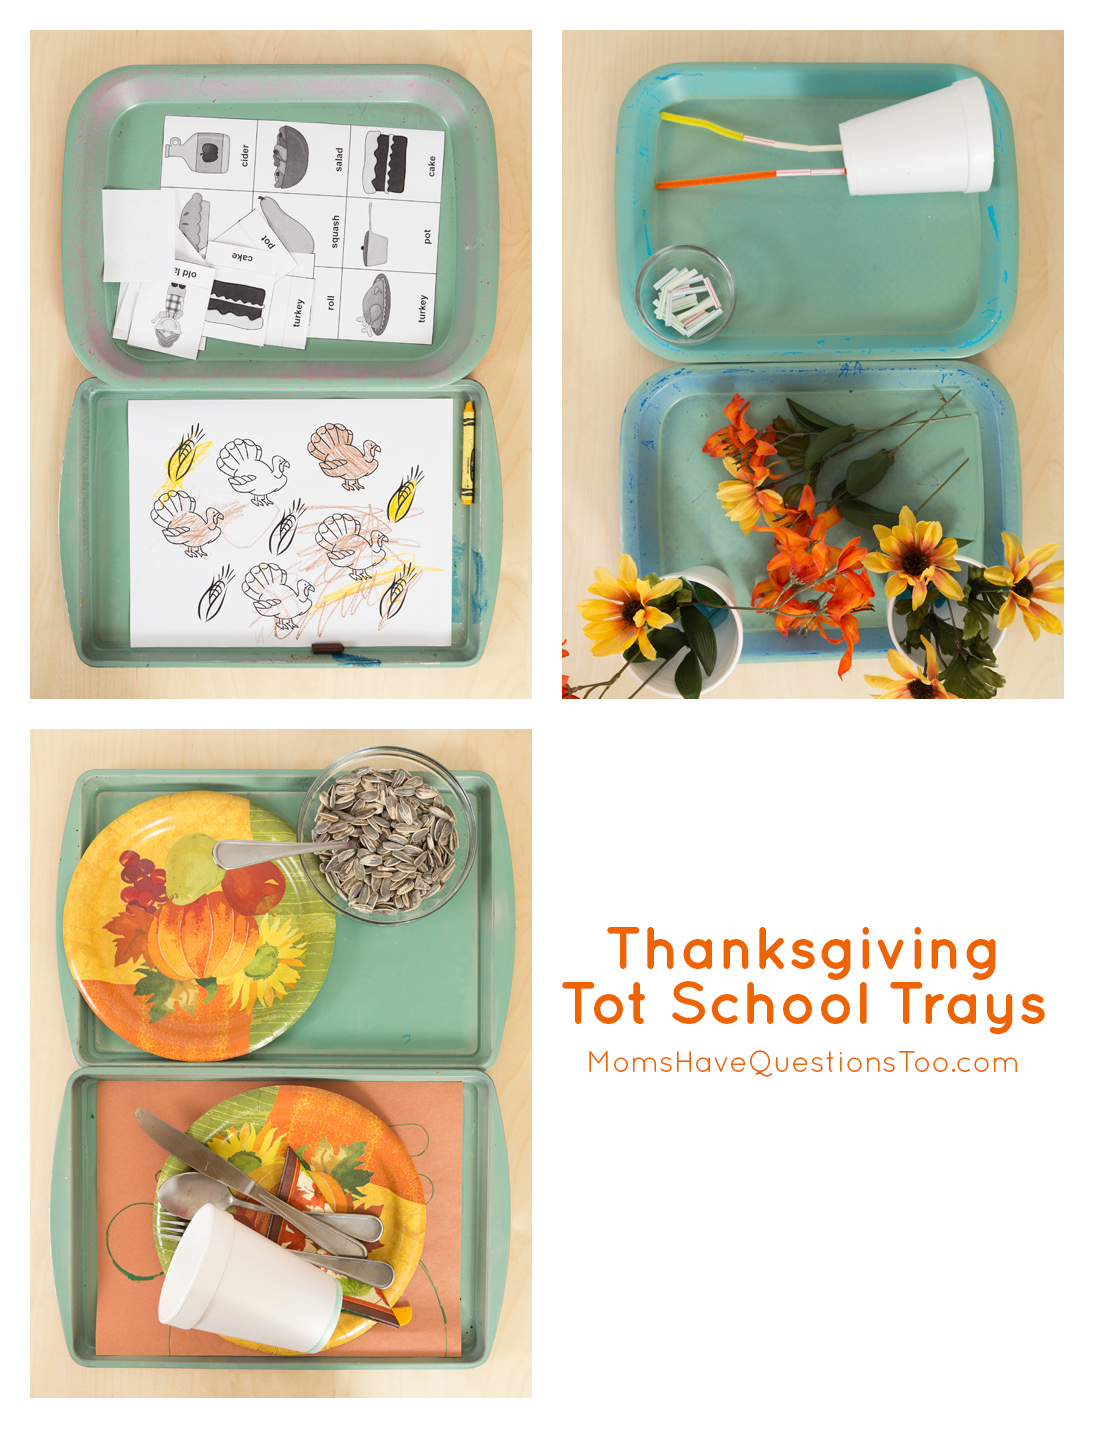 Thanksgiving Tot School Trays - Moms Have Questions Too